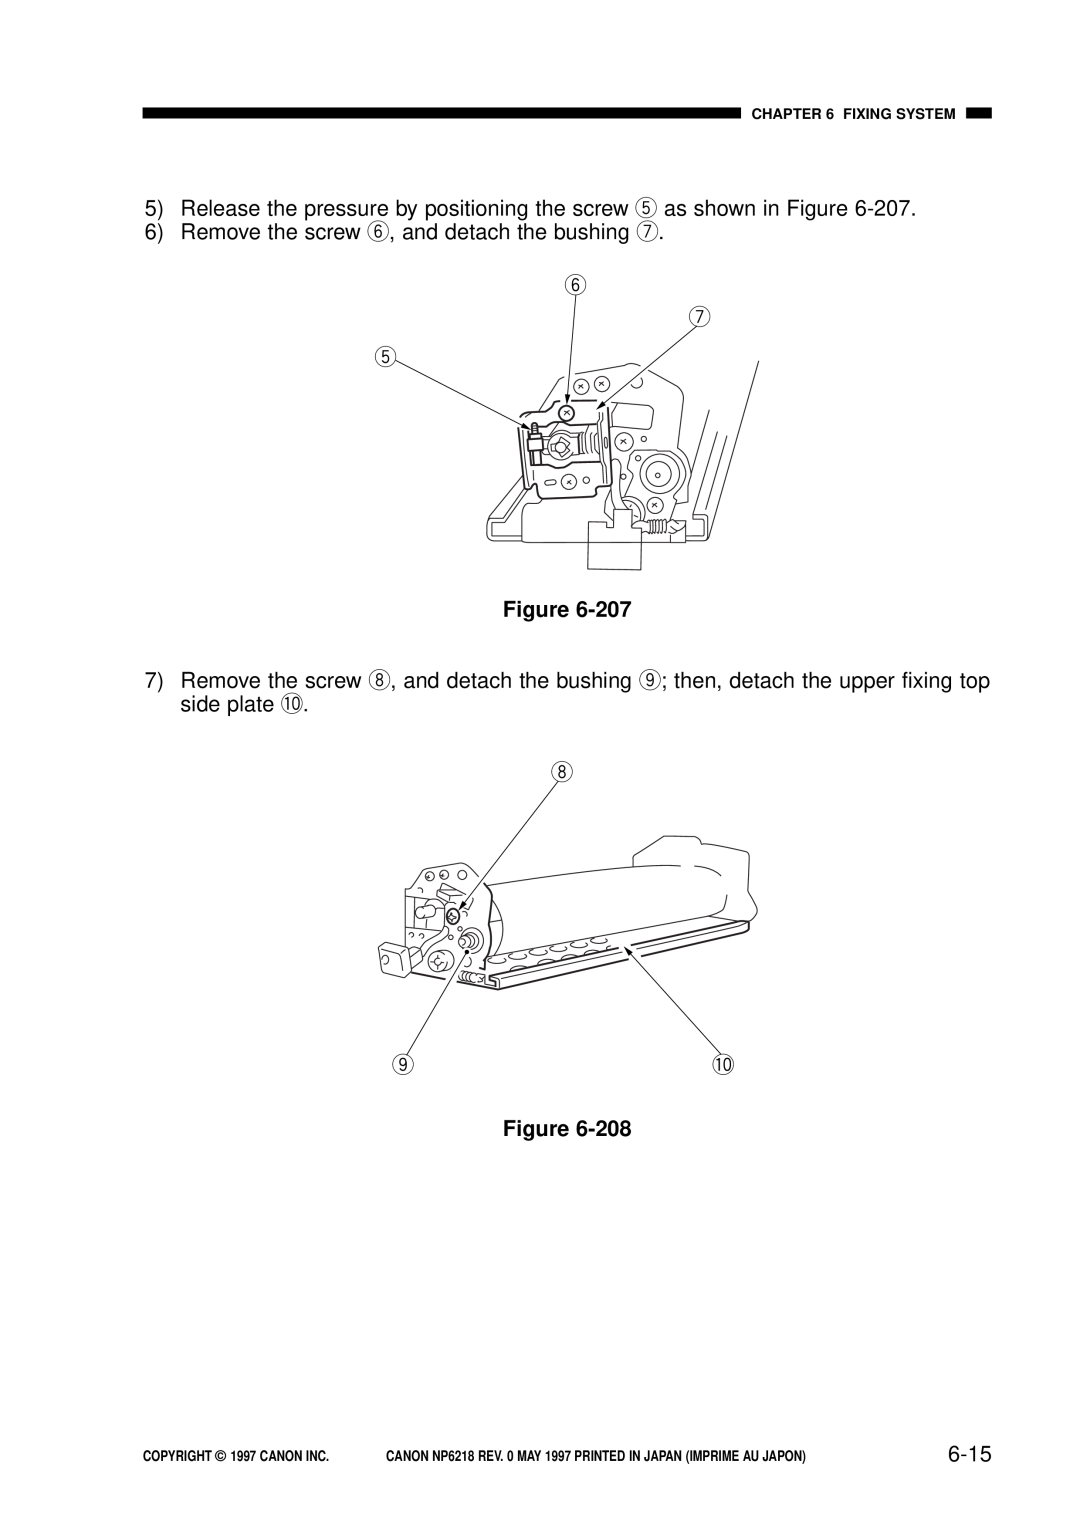 Canon FY8-13EX-000, NP6218 service manual y u t, i o!0, 6-15, Fixing System, COPYRIGHT 1997 CANON INC 